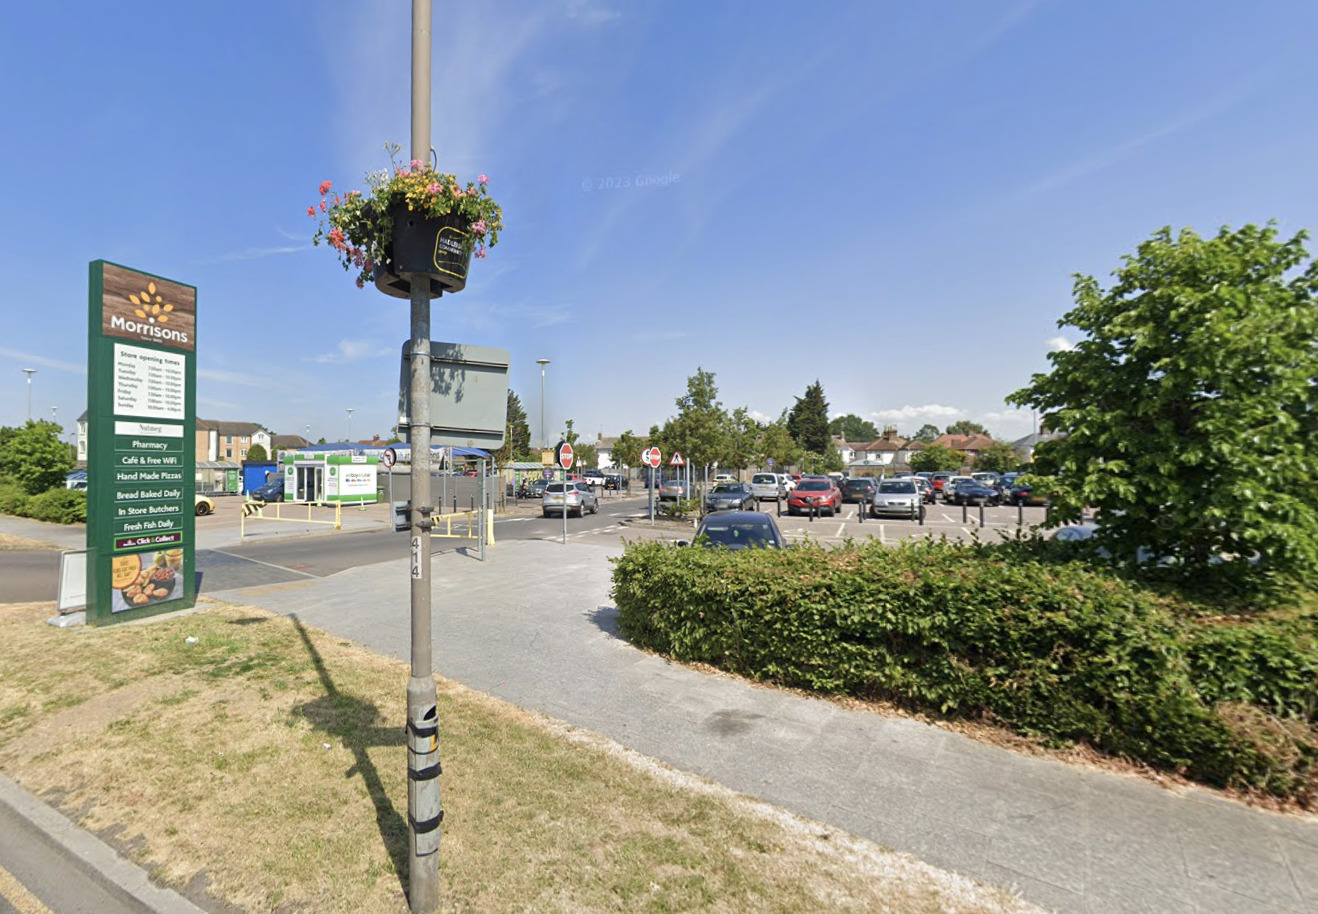 Leigh On Sea News: Car Park Cameras - A SUPERMARKET in Hadleigh has submitted plans to install cameras and signs in their car park.